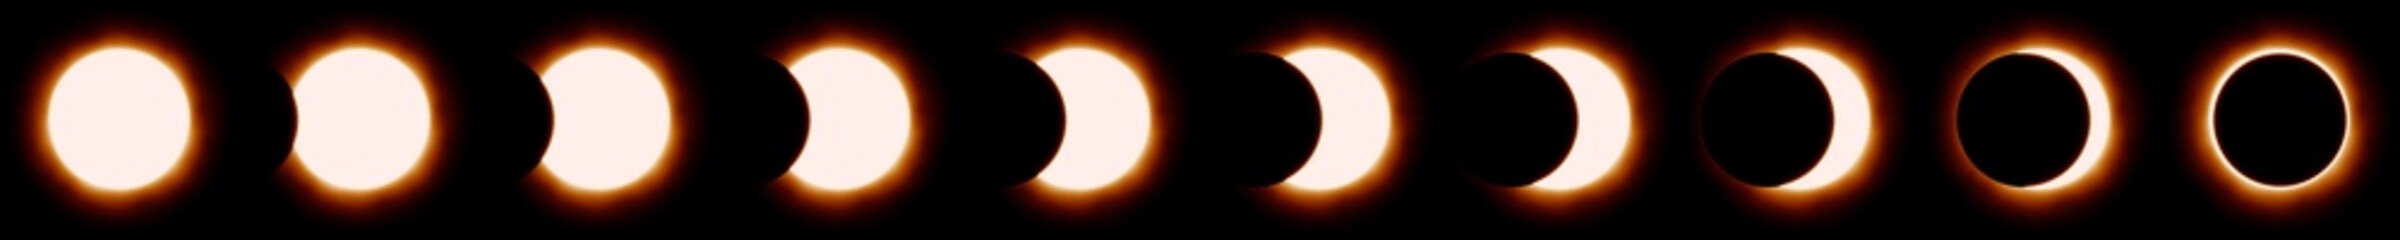 Different Phases of Solar Eclipse 3D Illustration Isolated